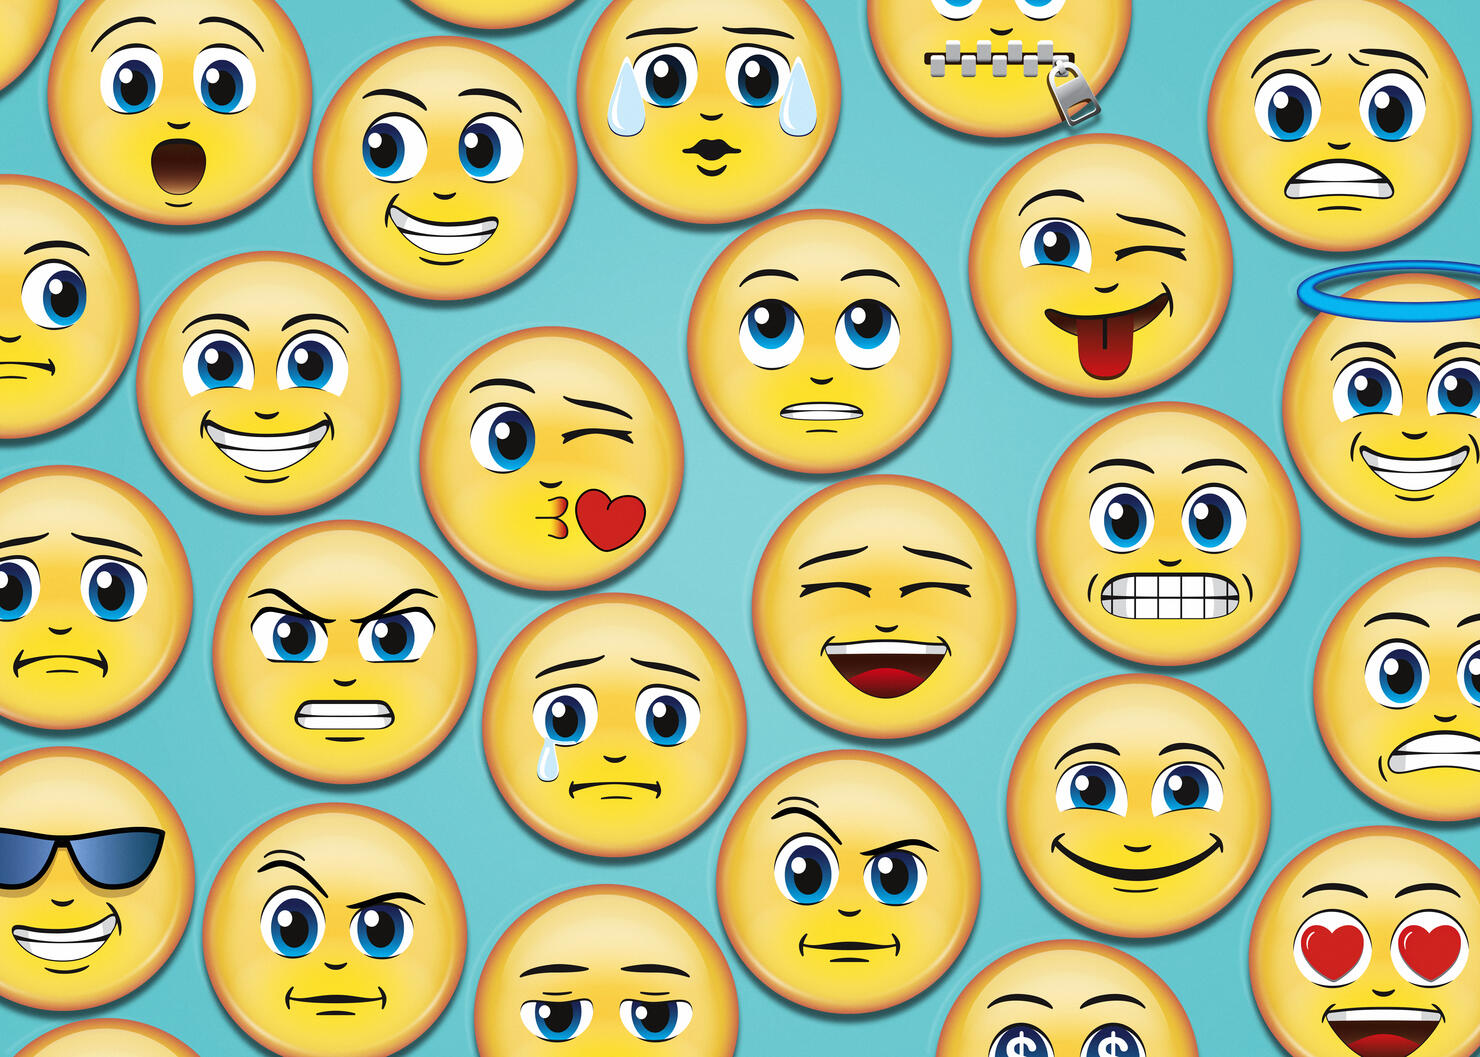 See all 37 new emojis, including beans, trolls, melting face